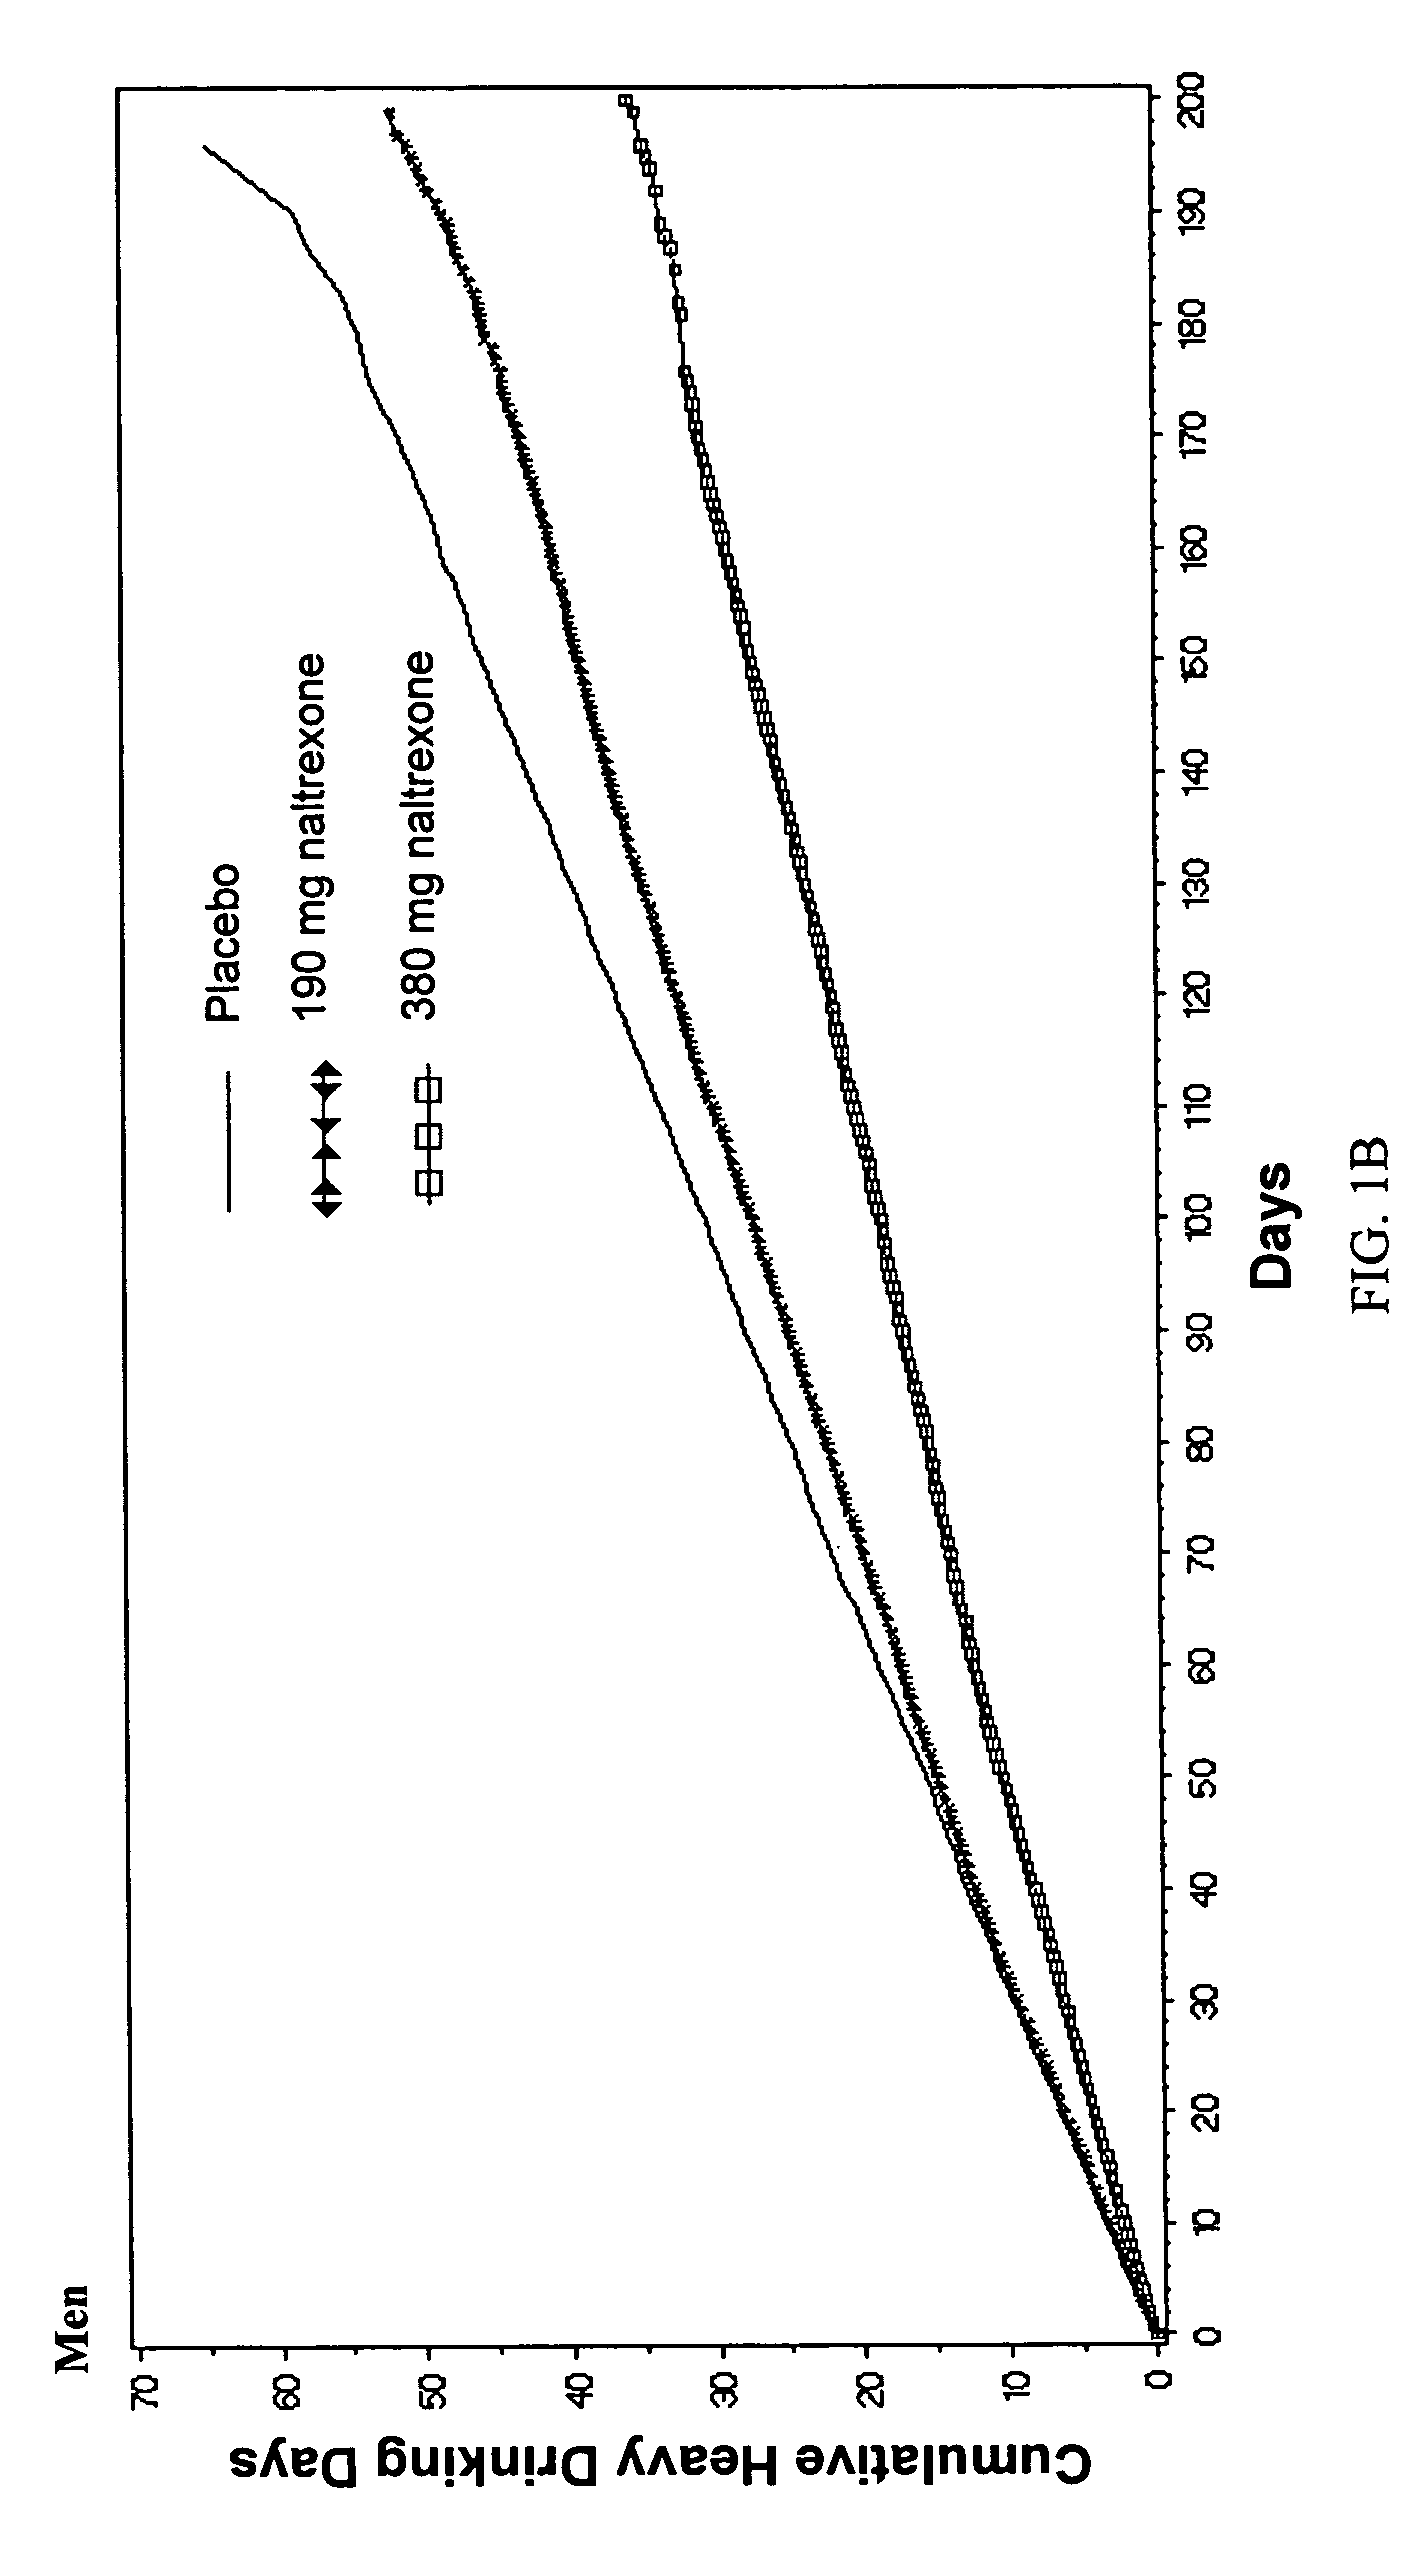 Naltrexone long acting formulations and methods of use